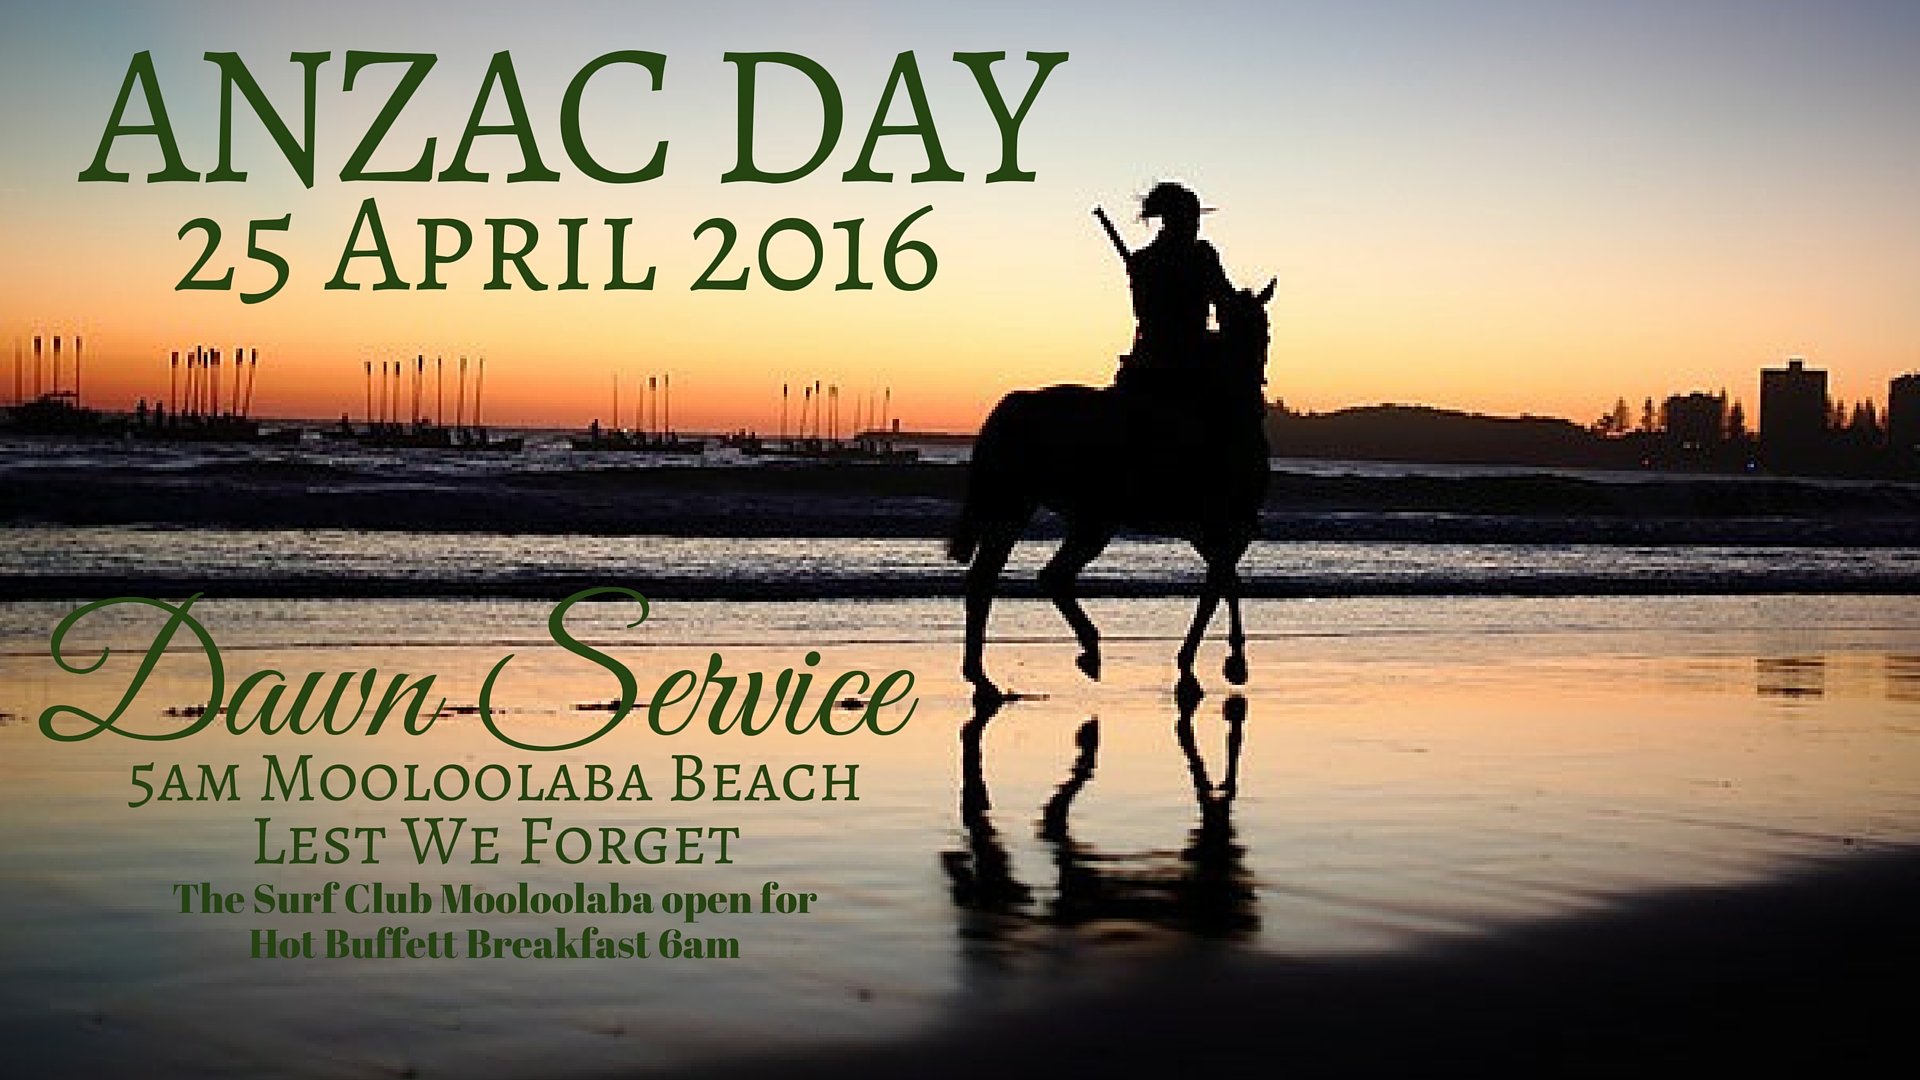 Amazing Anzac Day Pictures & Backgrounds